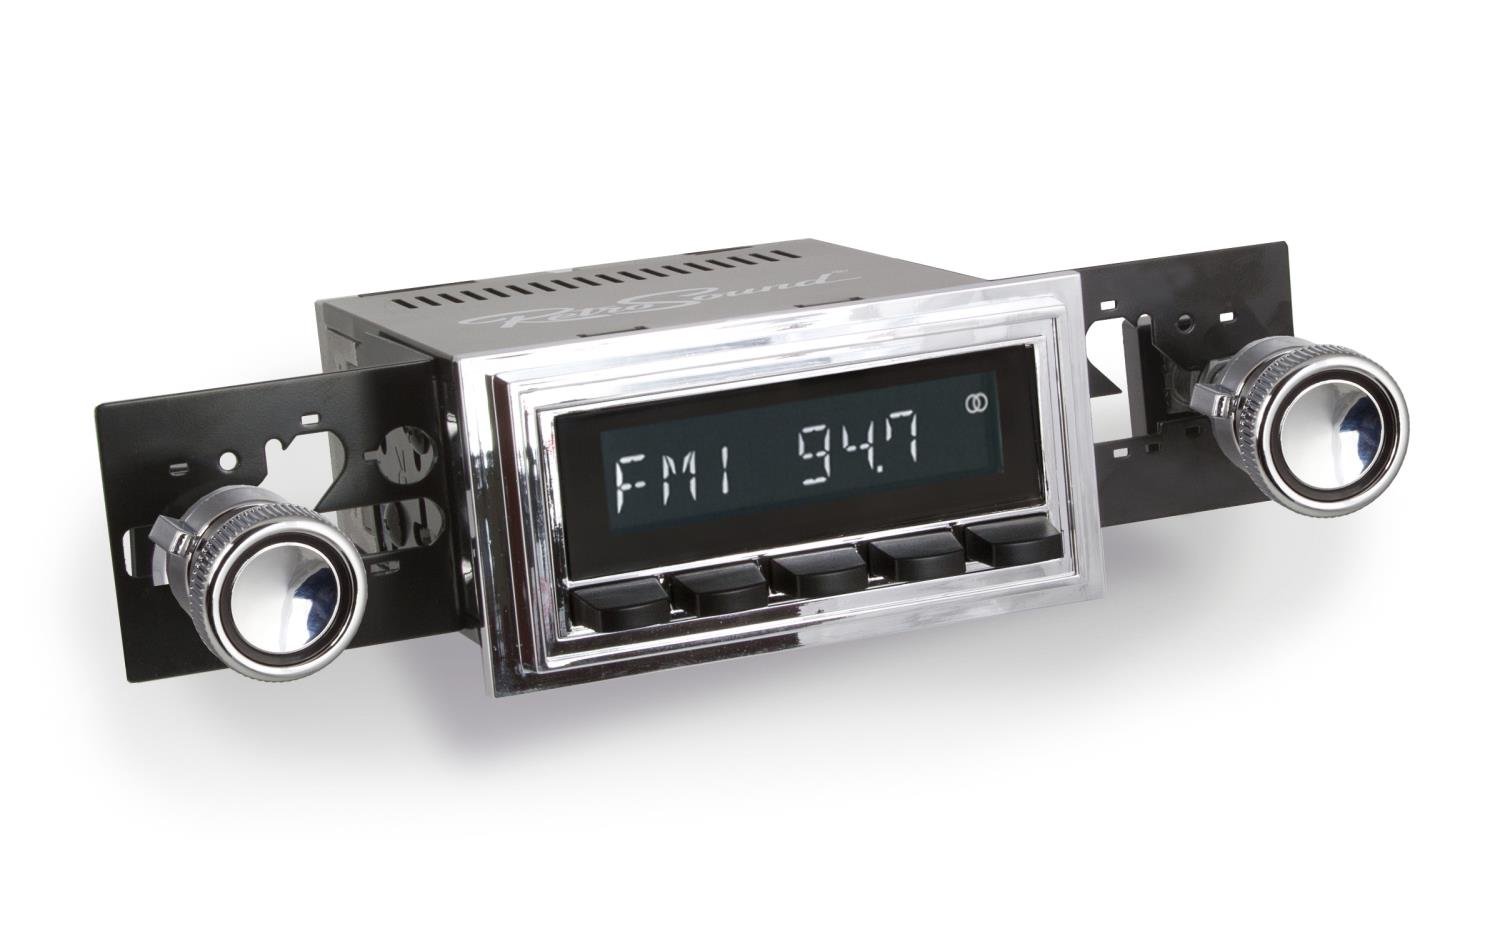 HCB-M2-126-08-80 Motor 2B Radio w/Chrome Face, Black Pushbuttons & Installation Bezel & Knobs Kit, 1967 Ford Mustang